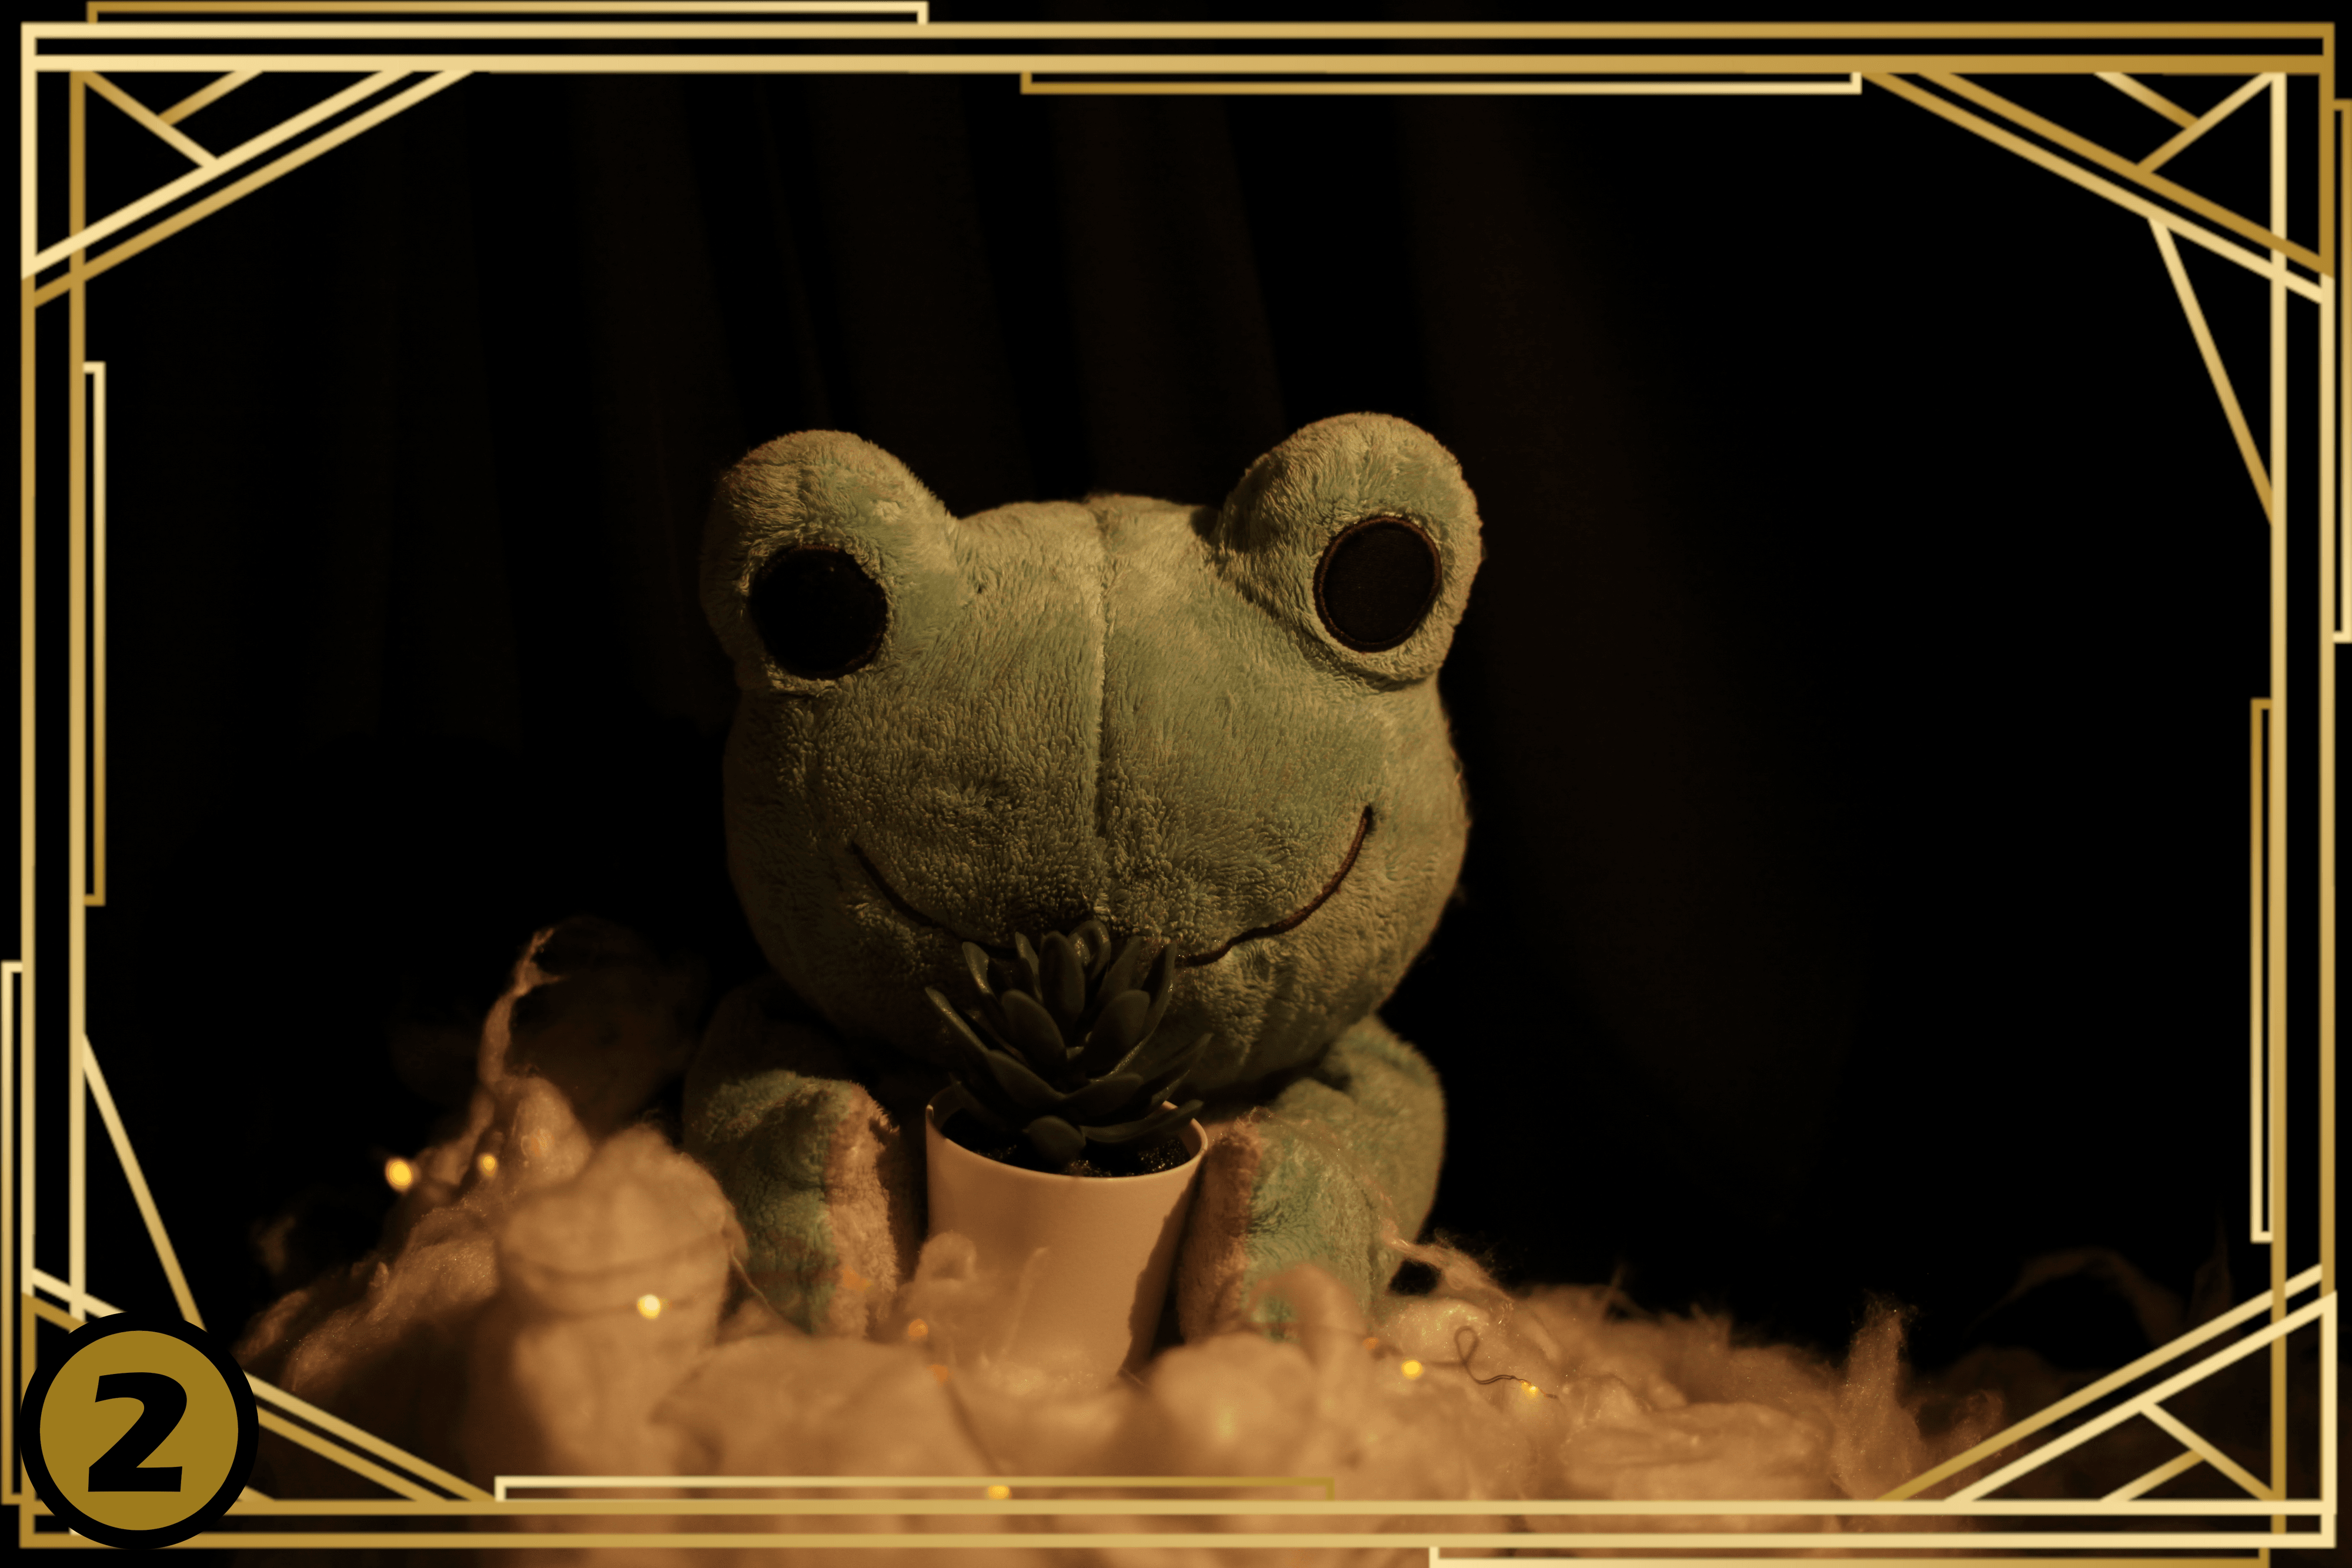 Pickles the Frog - s01c02